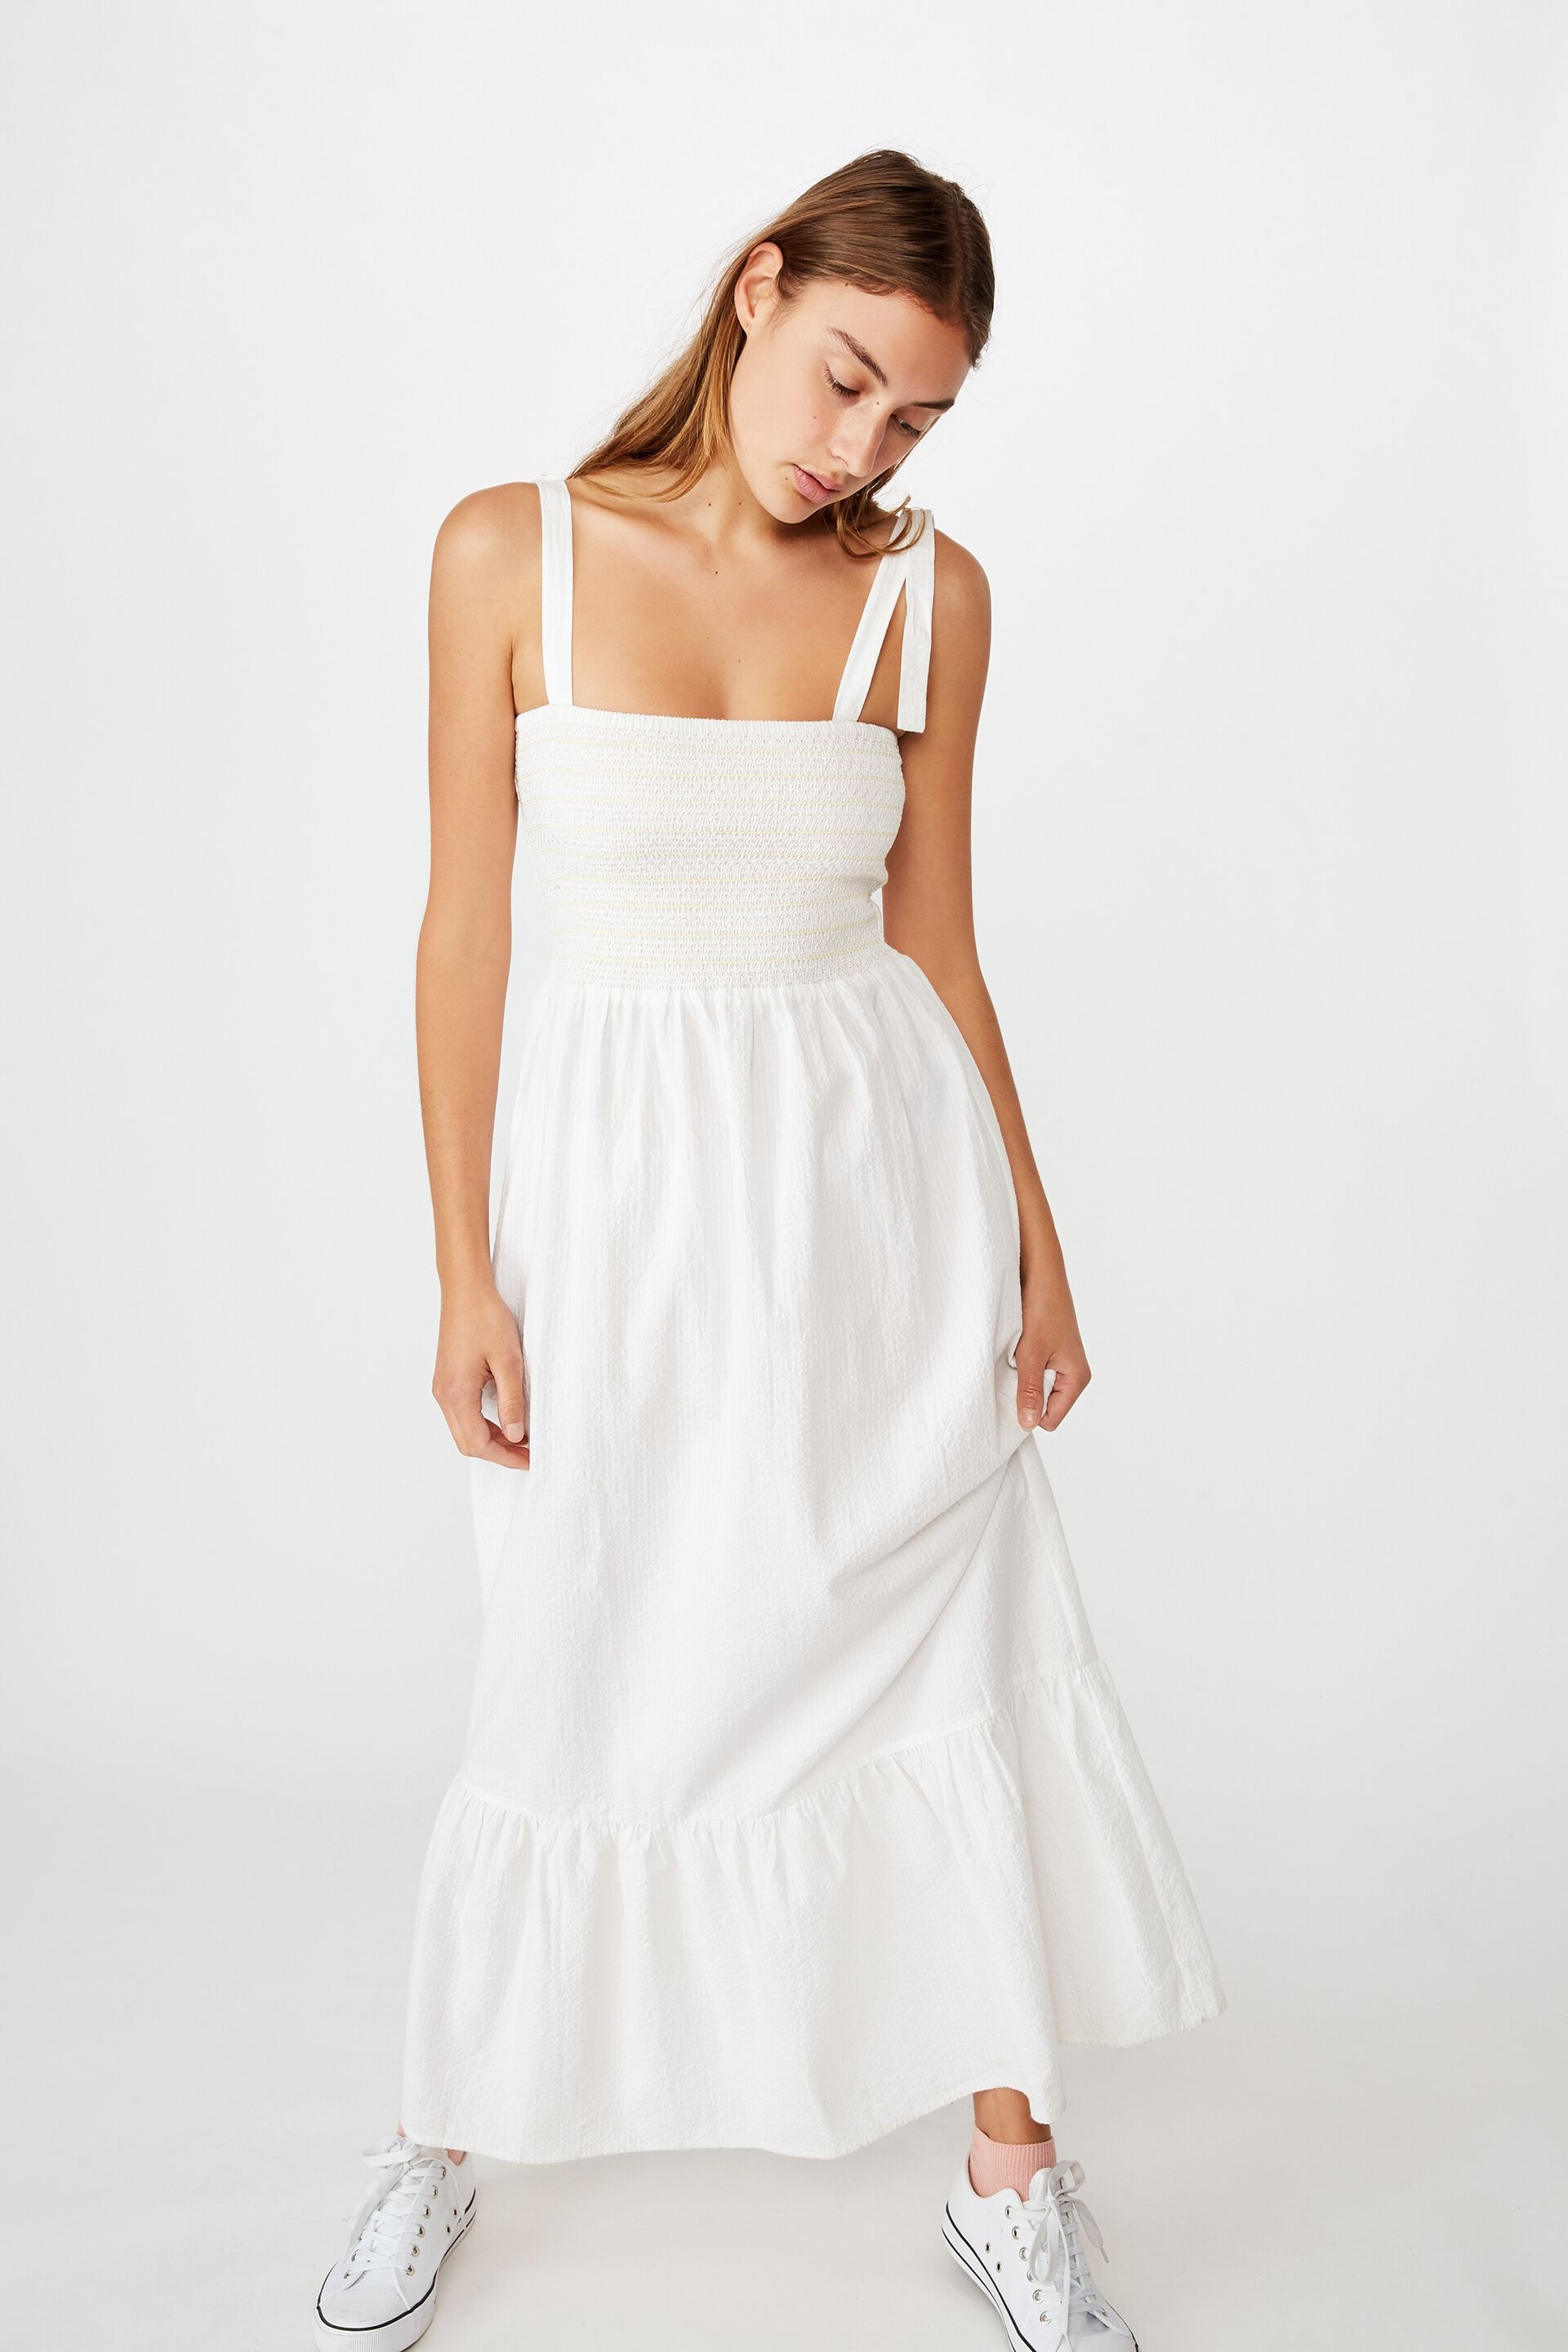 Cotton On White Dress Hot Sale, UP TO ...